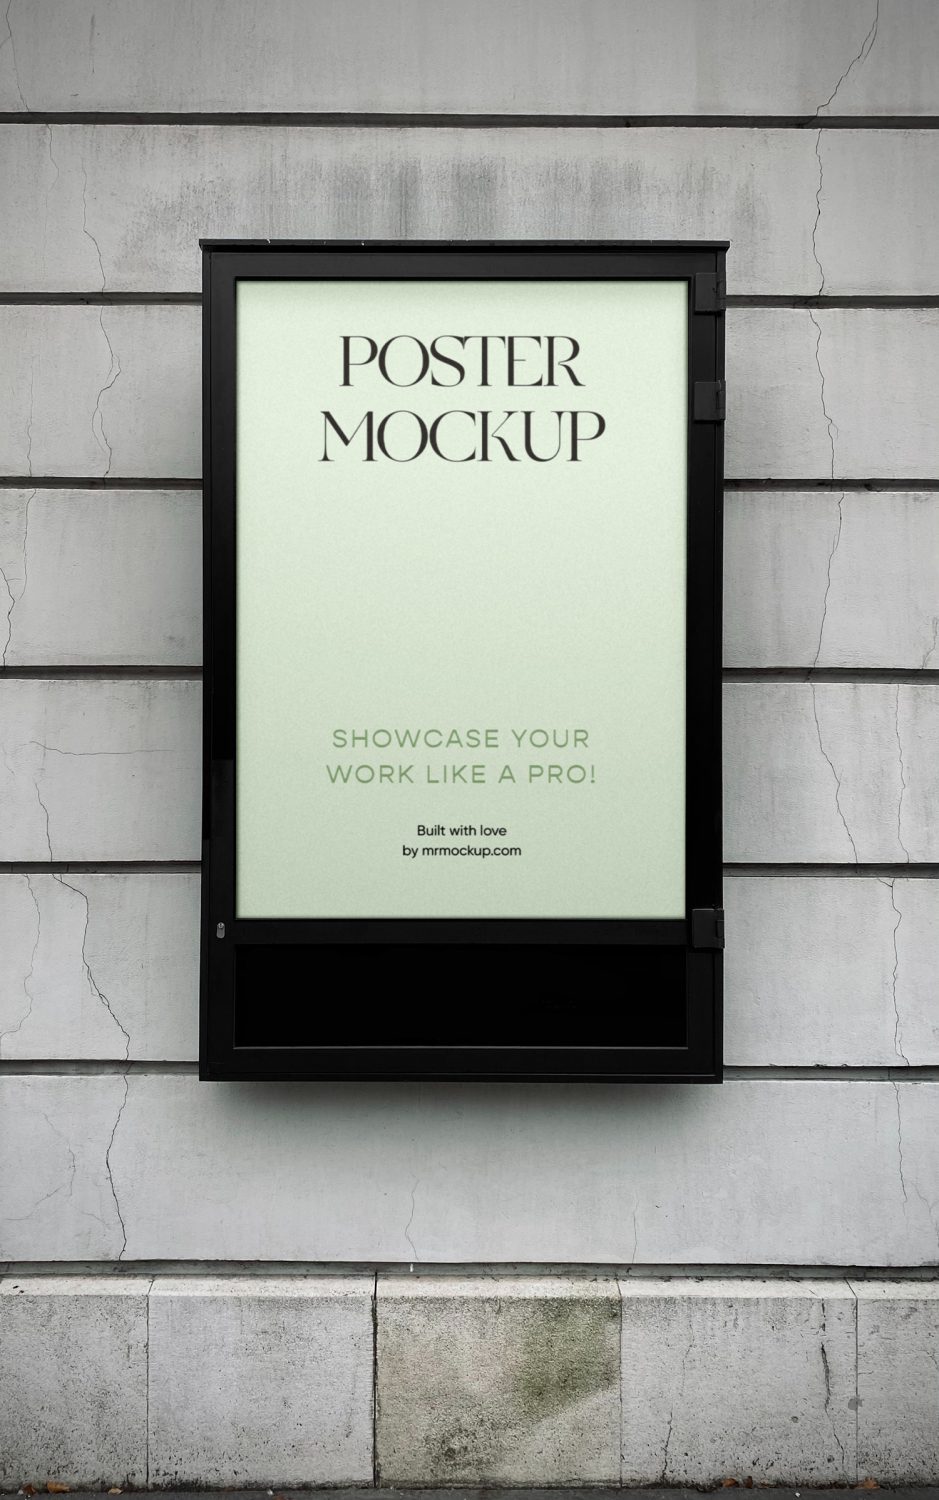 Free Poster on Building Wall Mockup